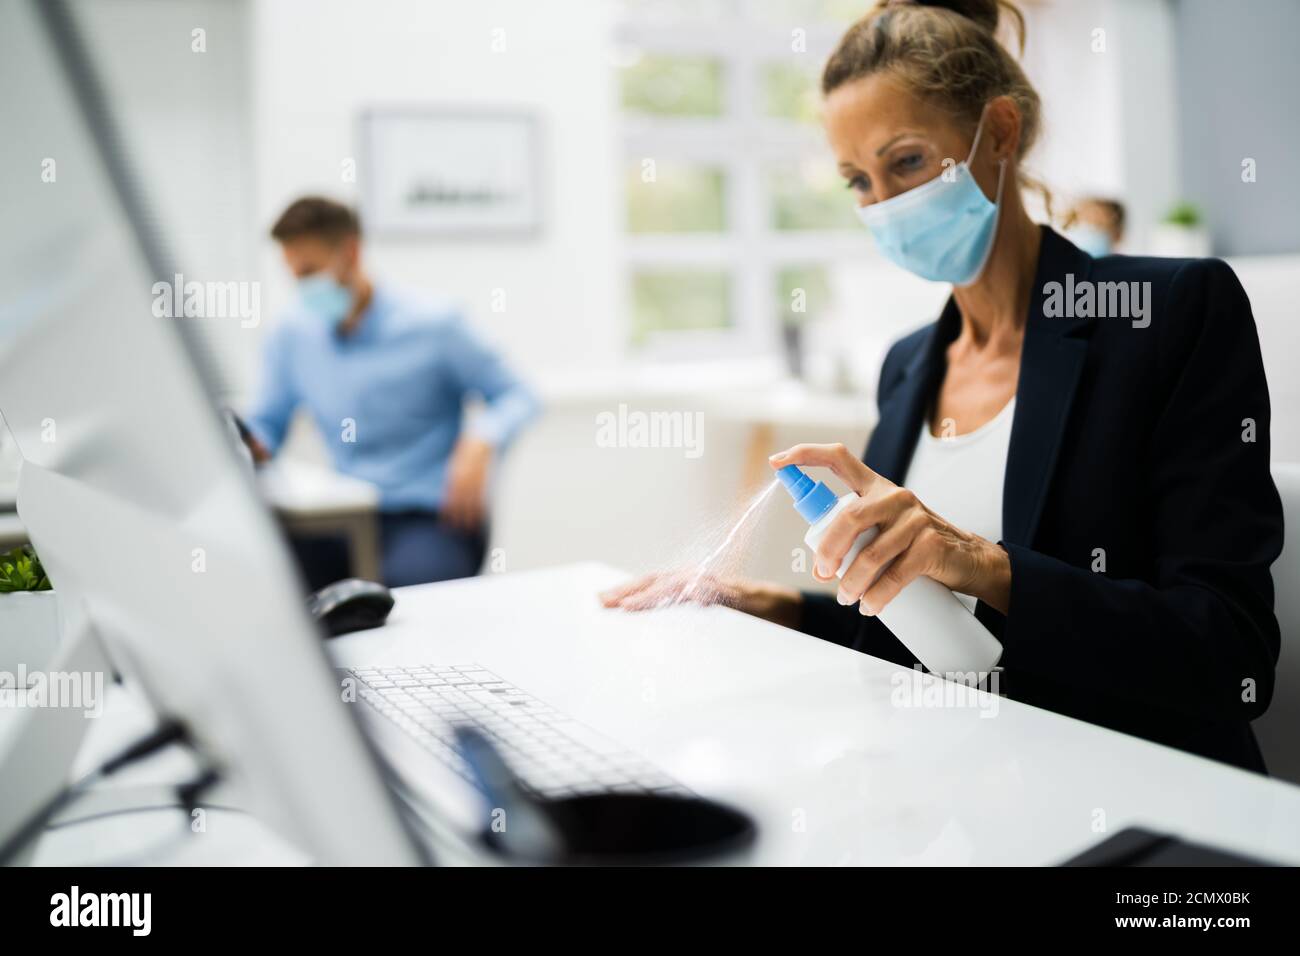 Woman Cleaning Desk In Office Using Alcohol Disinfectant Stock Photo